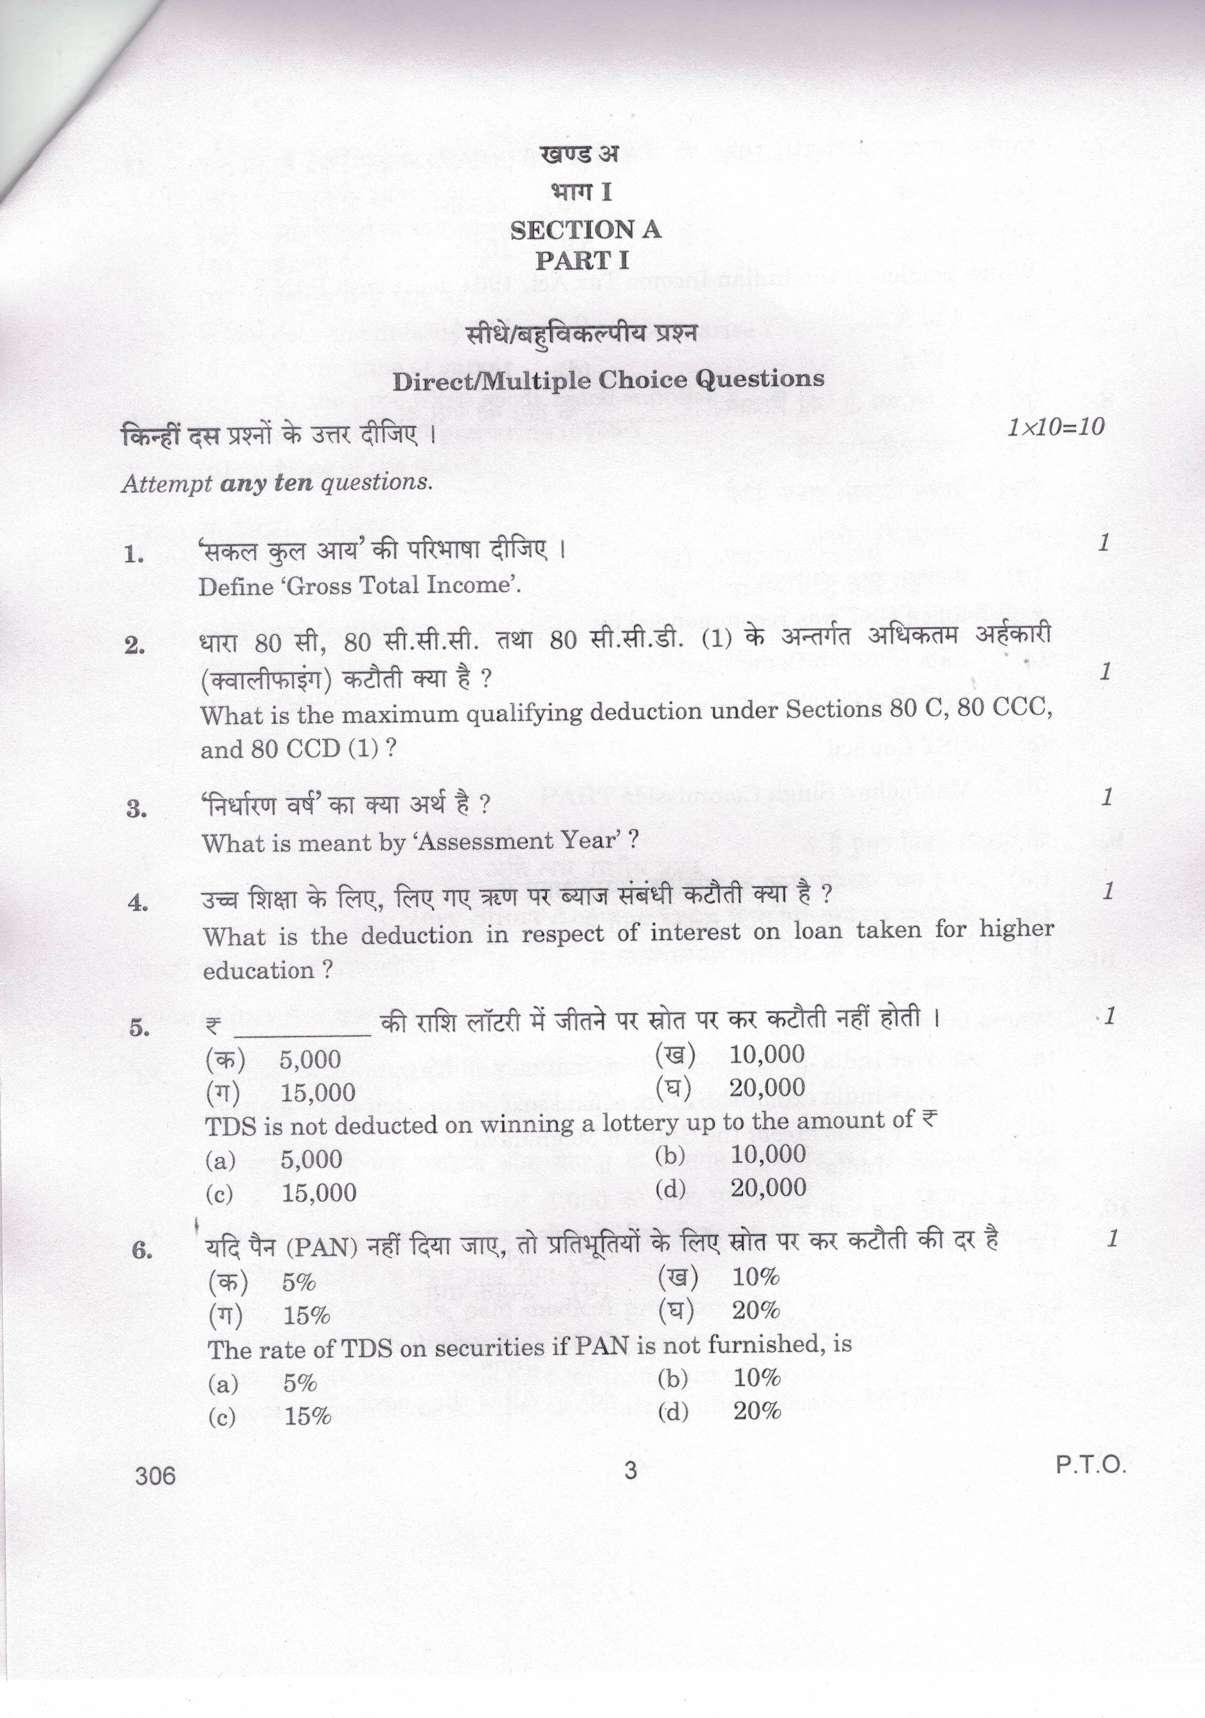 CBSE Class 12 306 Taxation_compressed 2019 Question Paper - Page 3